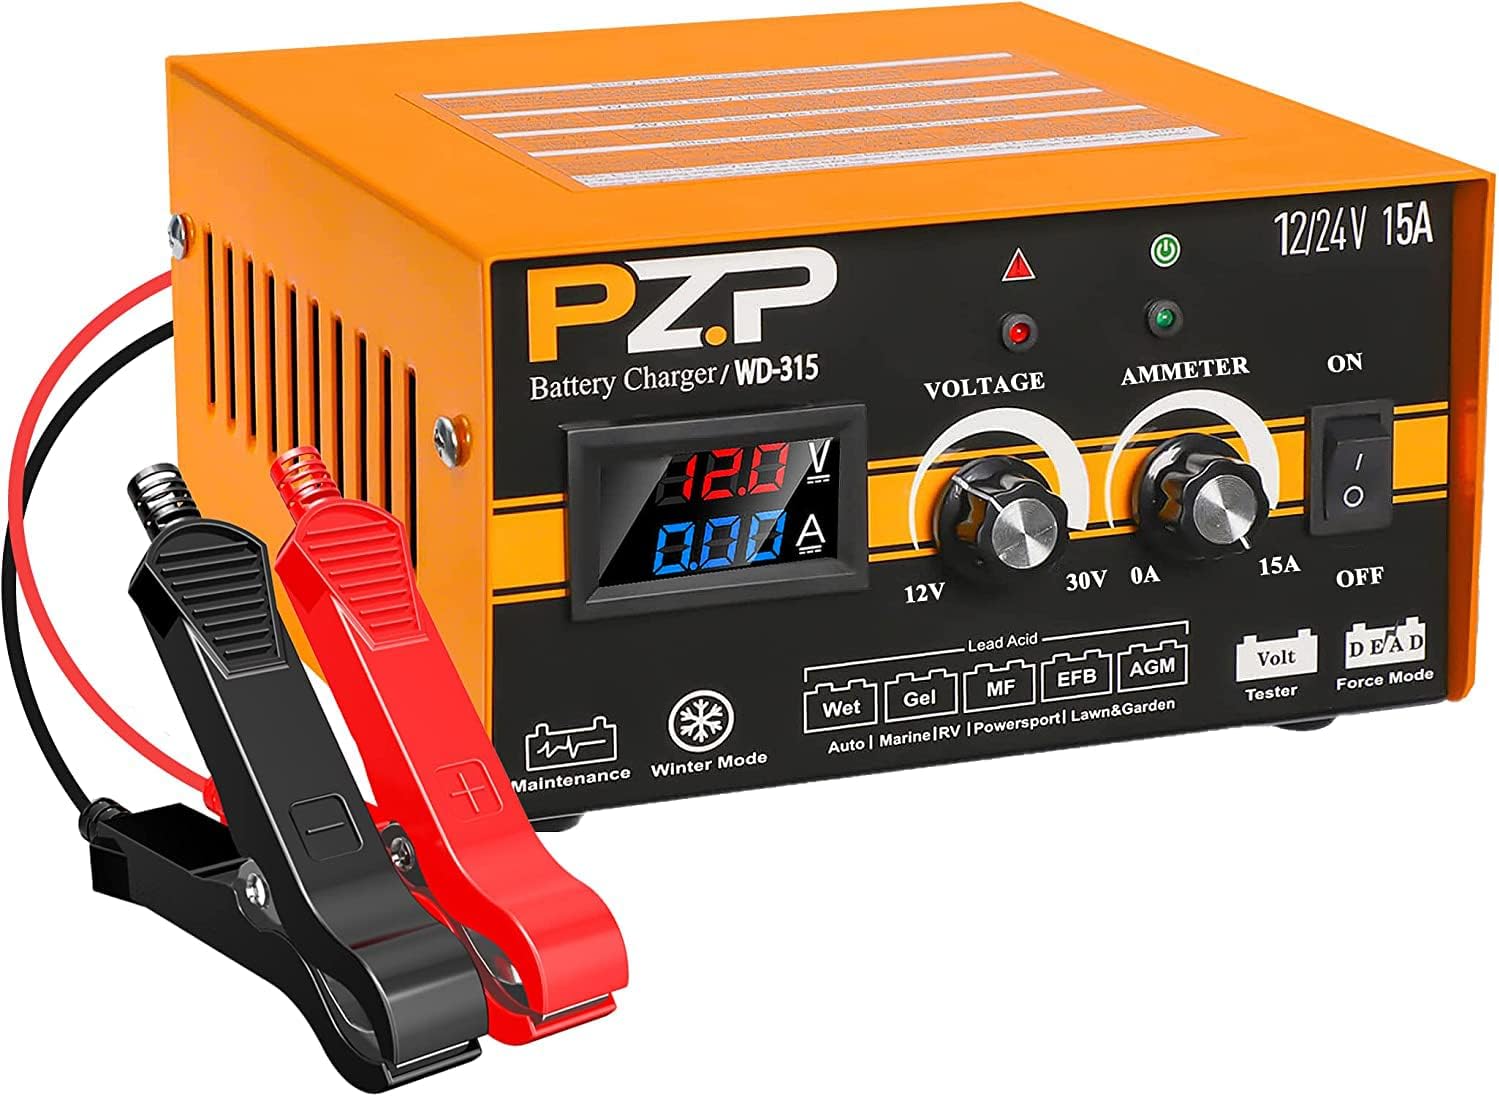 PZP 0-15A 12V 24V Car Battery Charger Automotive Motorcycle Boat Marine Trickle Charger 12 Volt 24 Volt Automobile Battery Charger Maintainer, Manual Deep Cycle Chargers - PZP 0-15A Car Battery Charger Review